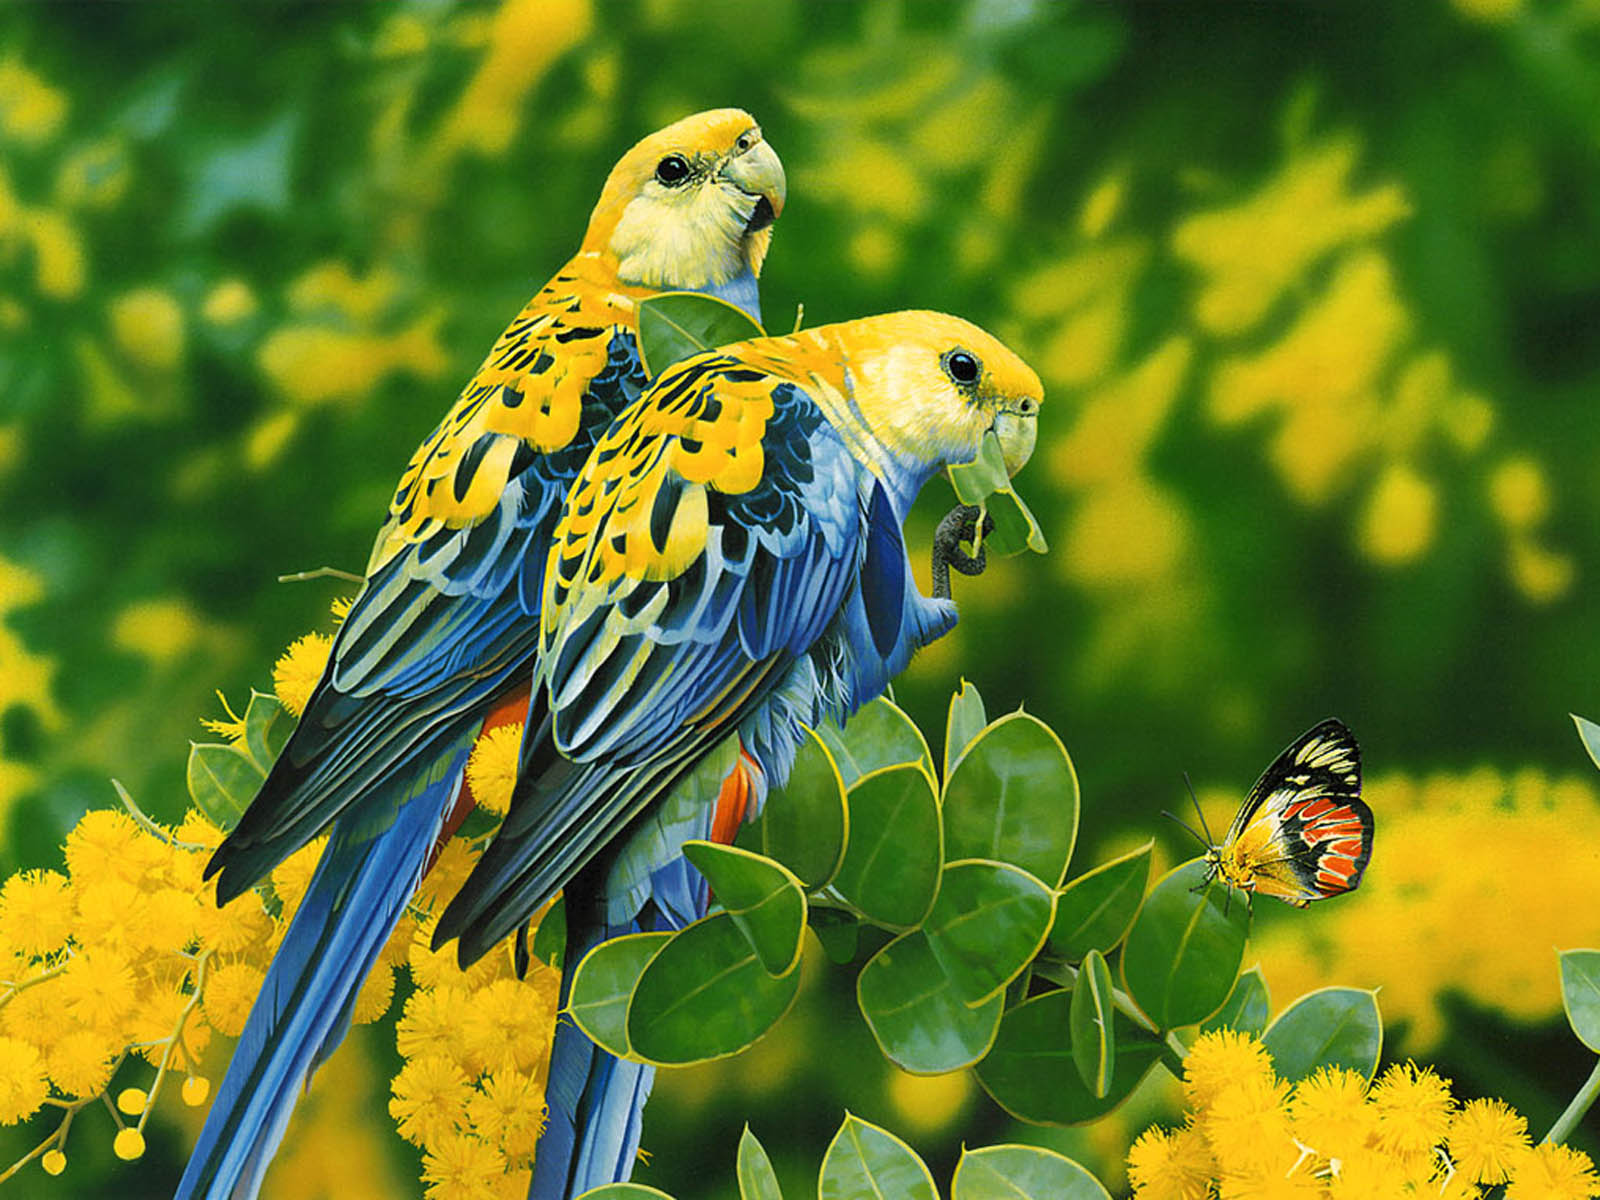 Tag Love Birds Desktop Wallpapers Backgrounds PhotosImages and